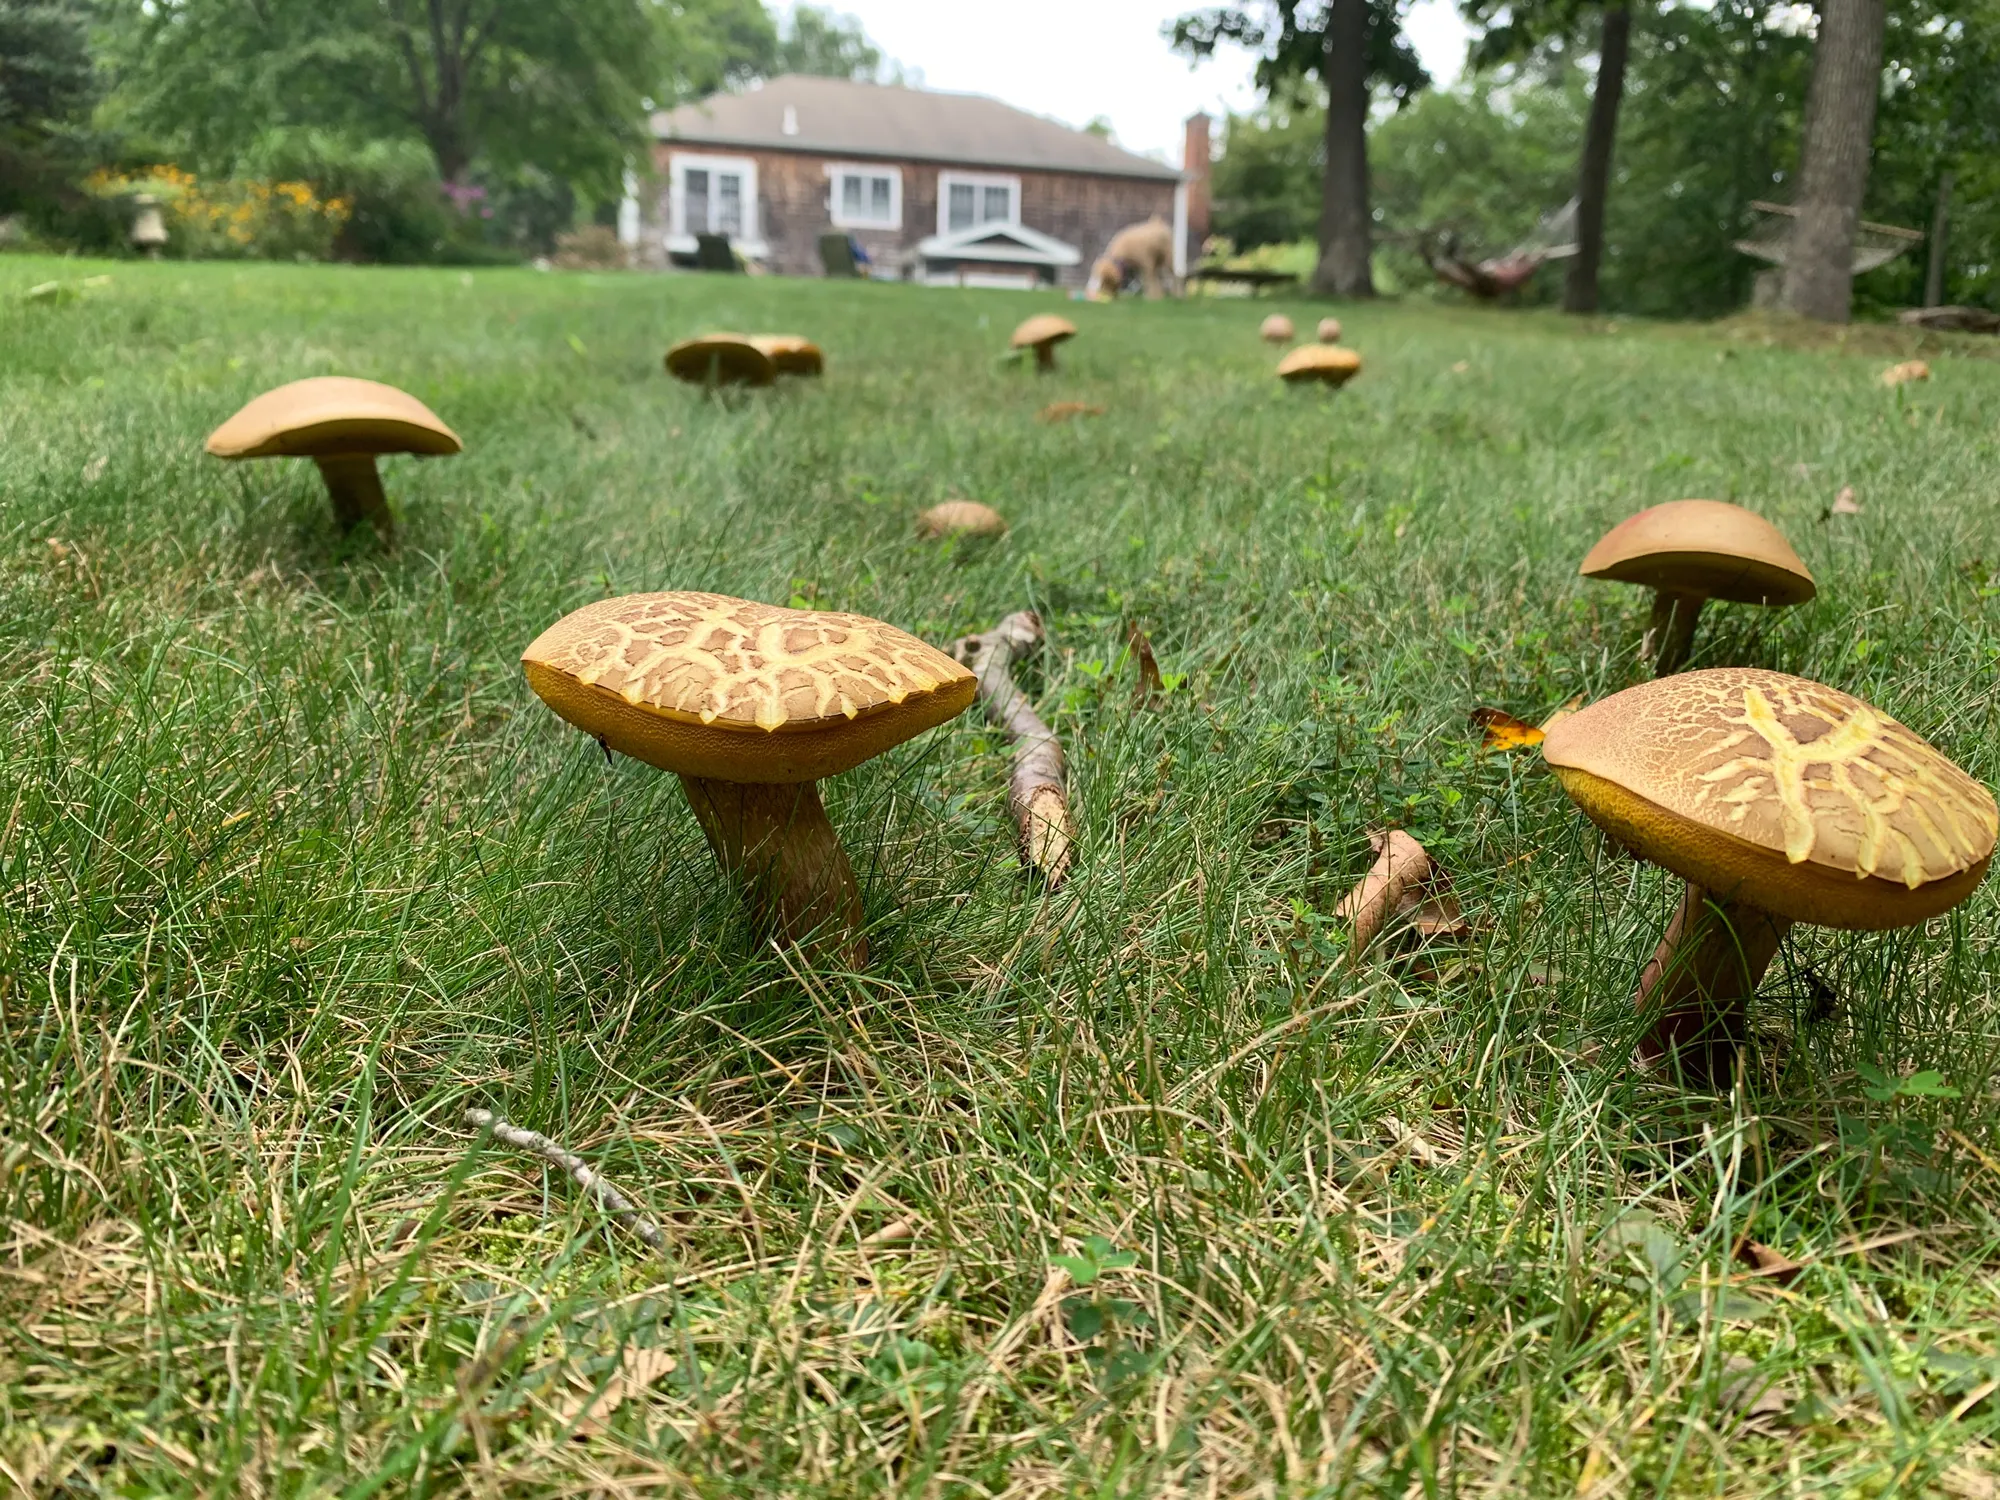 Many mushrooms growing on a lawn